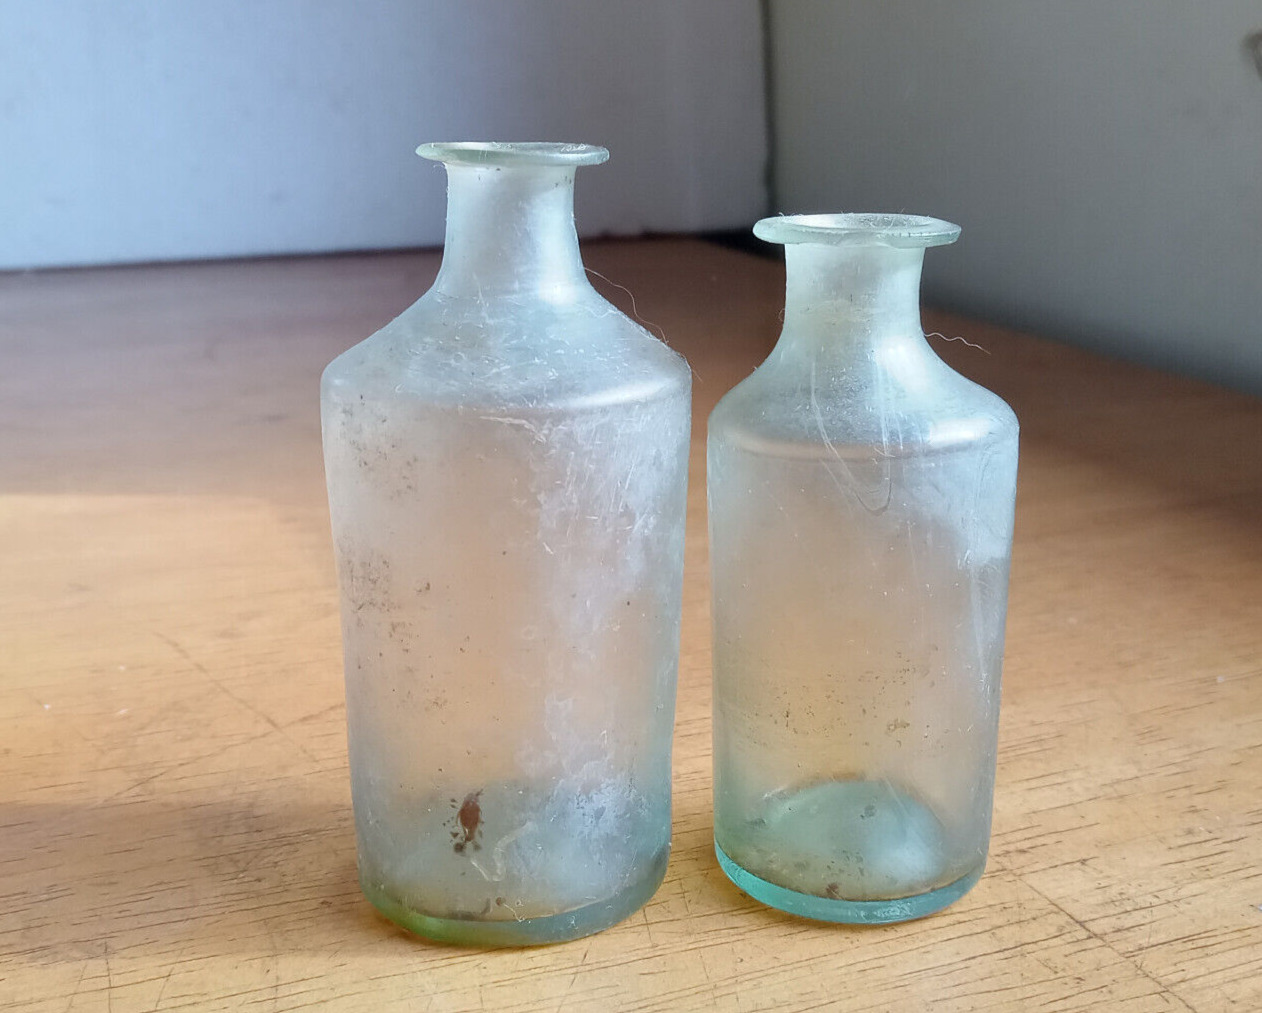 PAIR OF OPEN PONTIL SMALL PUFF MEDICINE BOTTLES DUG IN 1840s ILLINOIS PRIVY